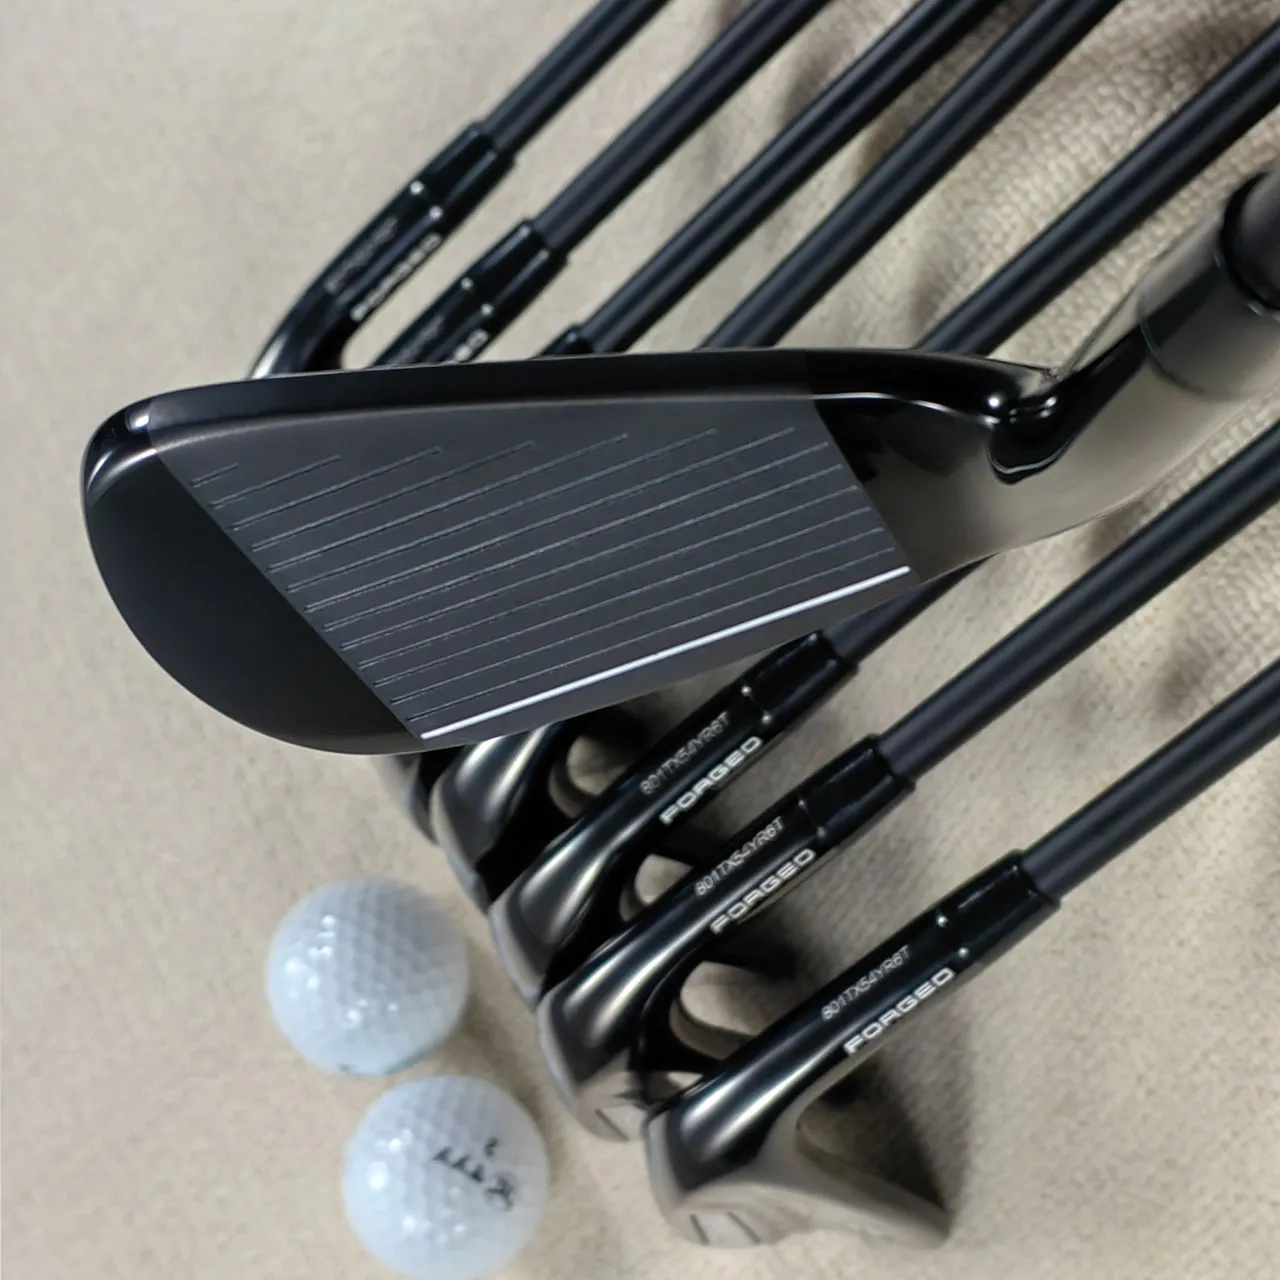 790 Golf Irons Individual or Golf Irons Set for Men 4-9PS or Driving Irons Right Hand Steel Shaft Regular Flex Golf Clubs